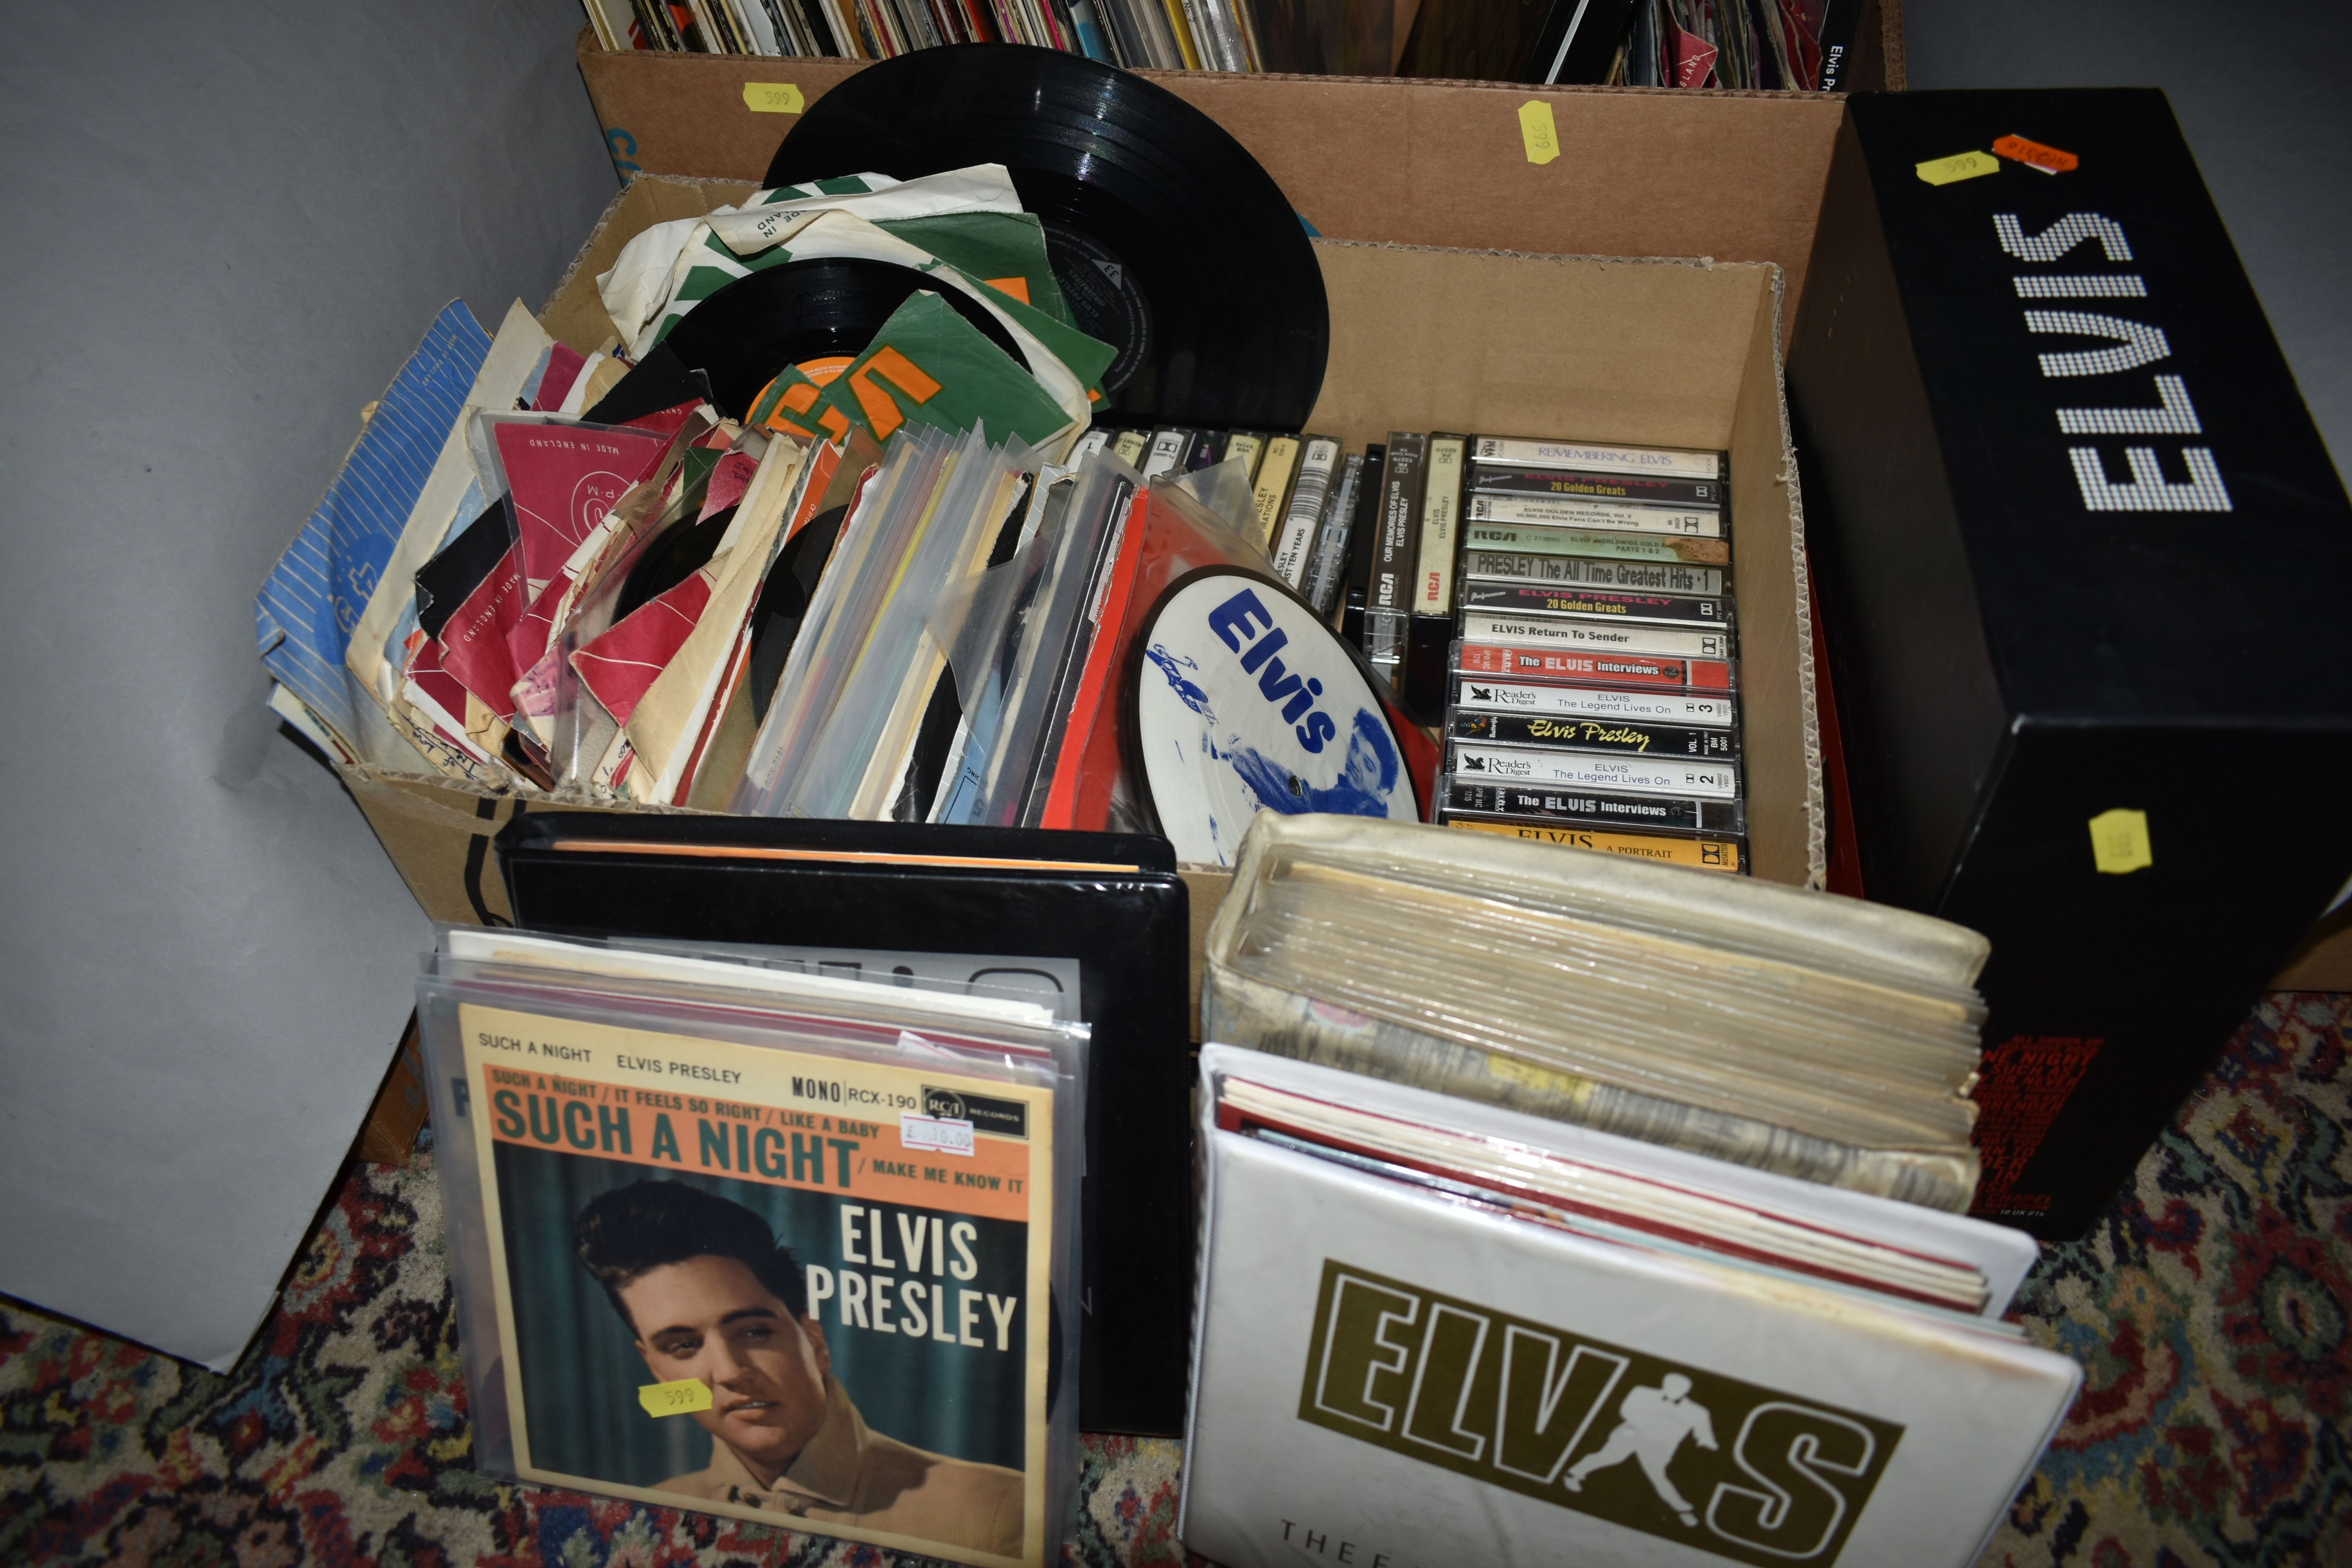 THREE BOXES OF ELVIS PRESLEY LPs, TAPE CASSETTES, 45RPM AND 45E.P RECORDS, over one hundred assorted - Image 2 of 4